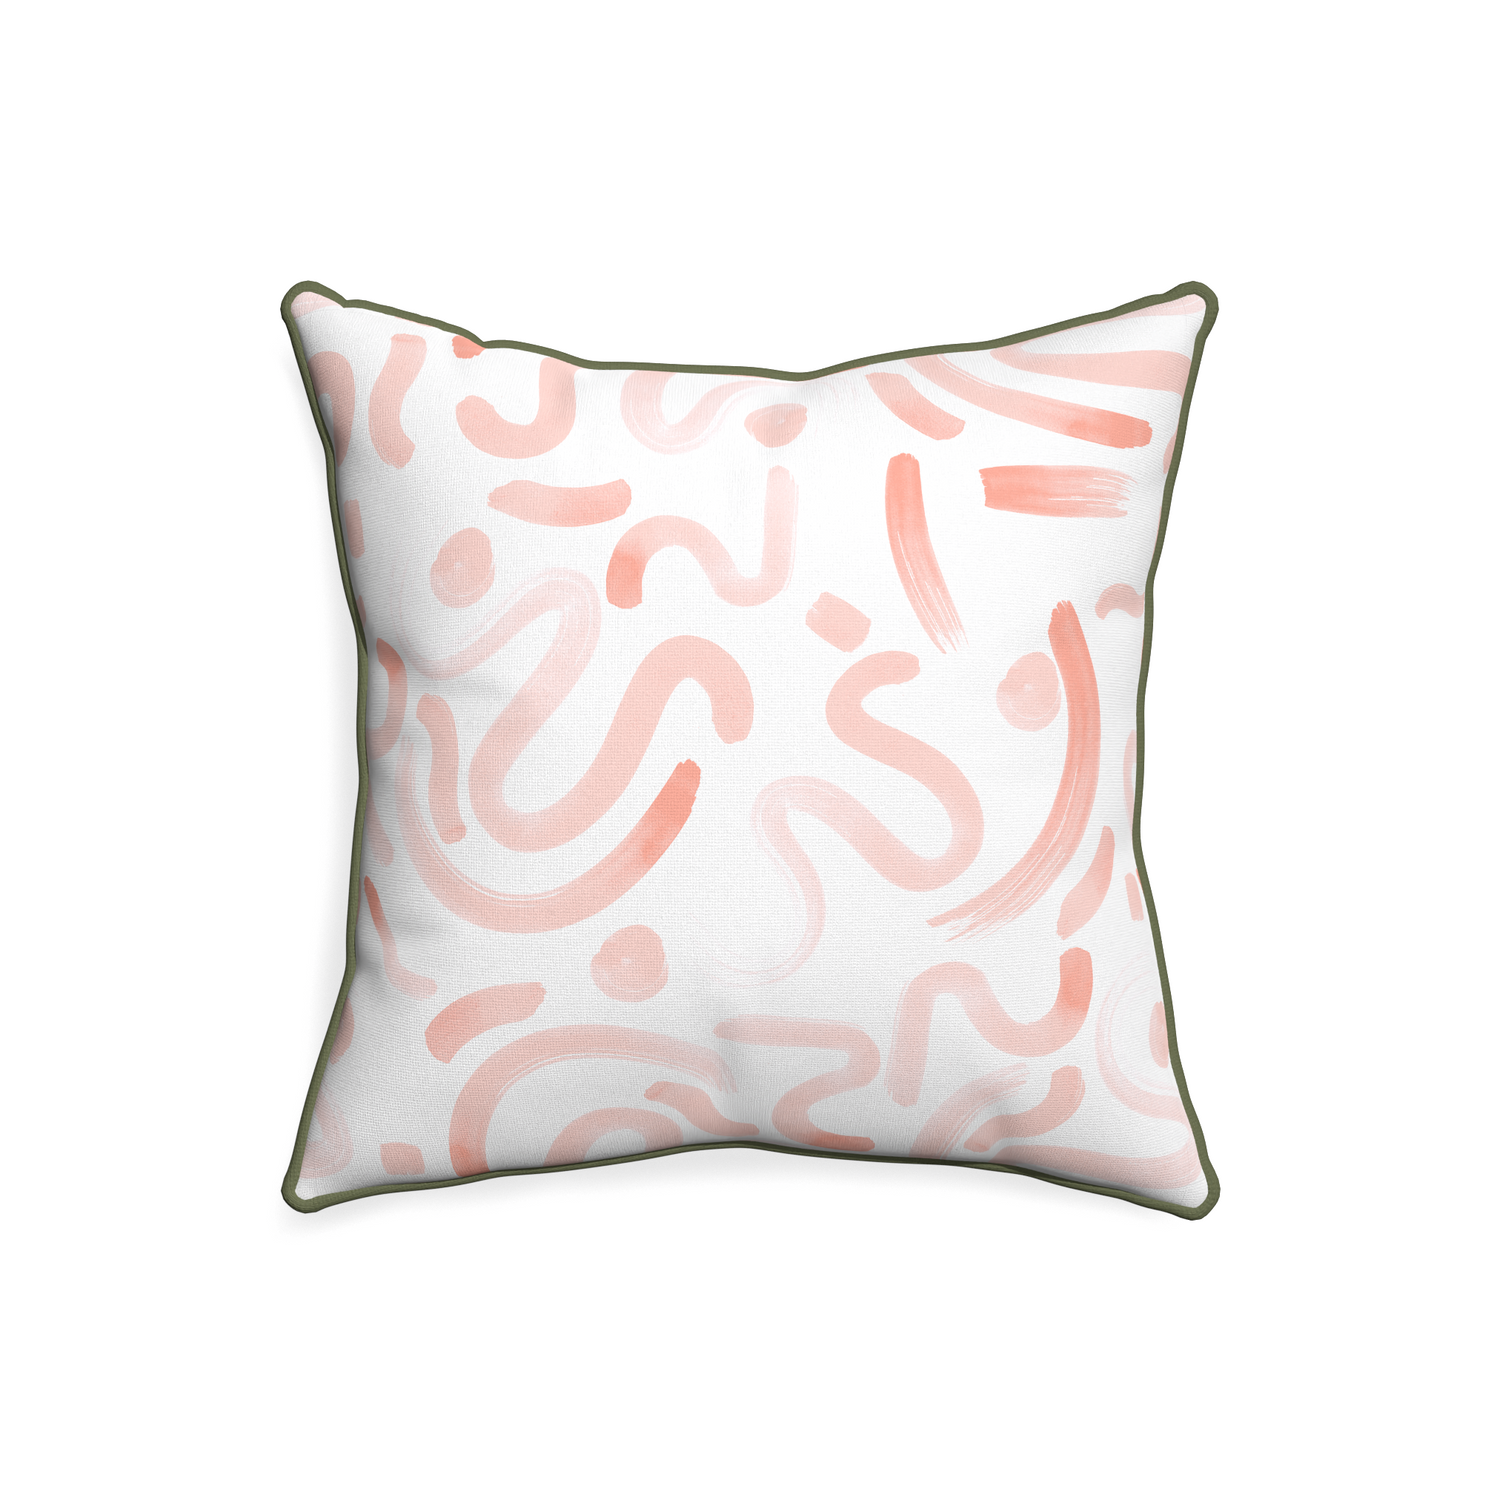 20-square hockney pink custom pillow with f piping on white background